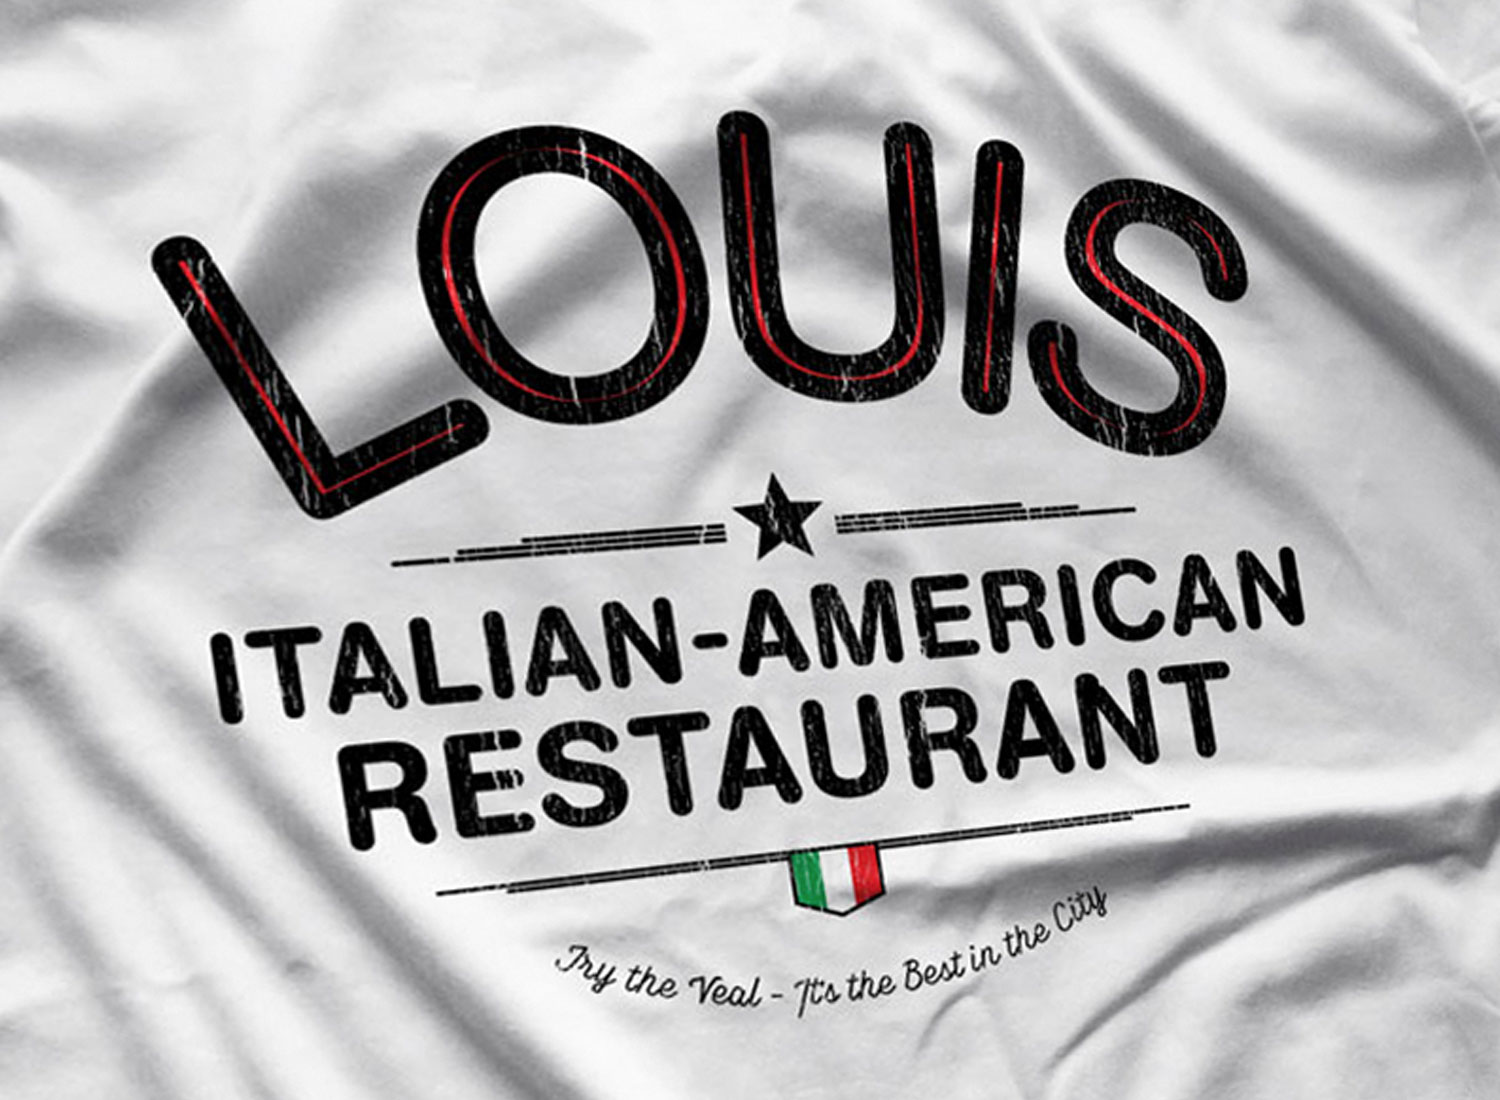 Louis Restaurant T-Shirt Inspired by The Godfather - Regular T-Shirt — MoviTees